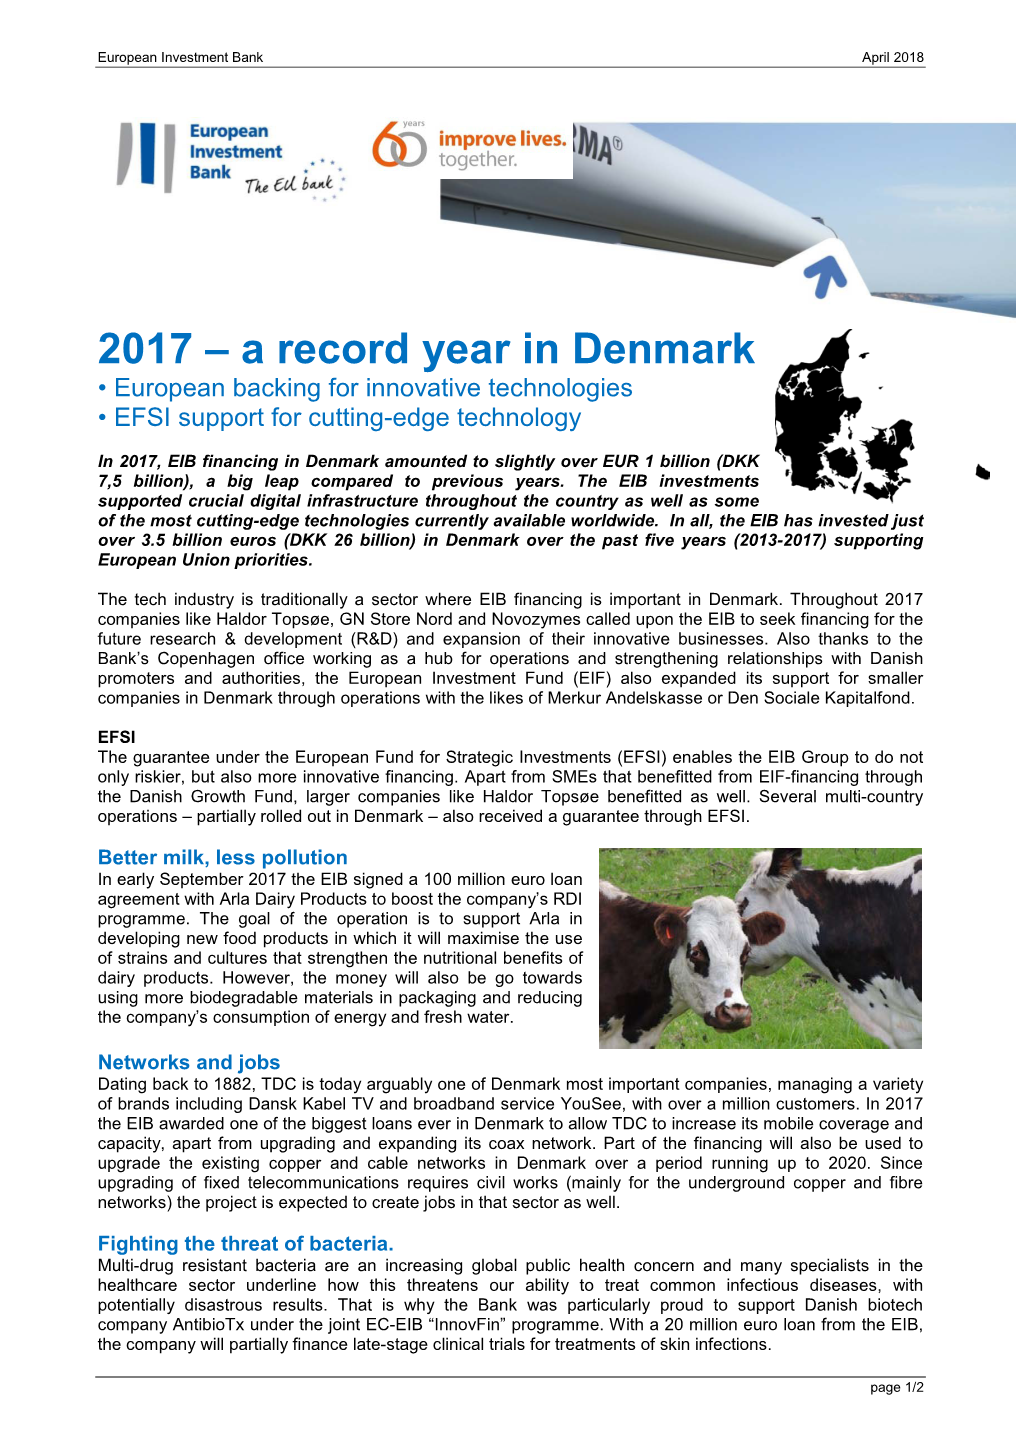 2017 – a Record Year in Denmark • European Backing for Innovative Technologies • EFSI Support for Cutting-Edge Technology